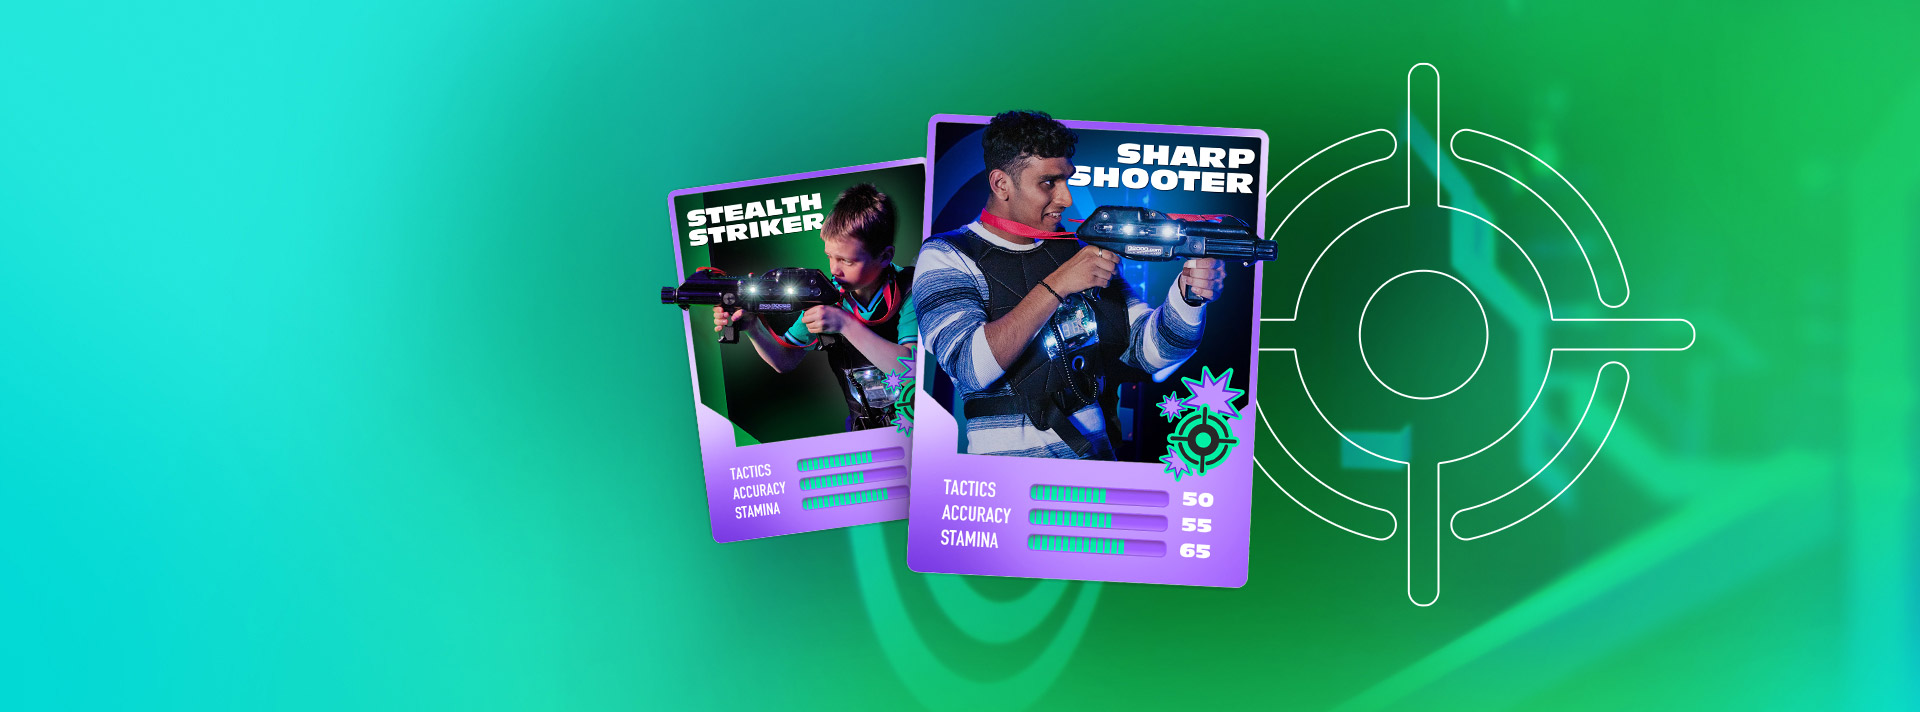 May Deal Laser Tag Landing Page Banner